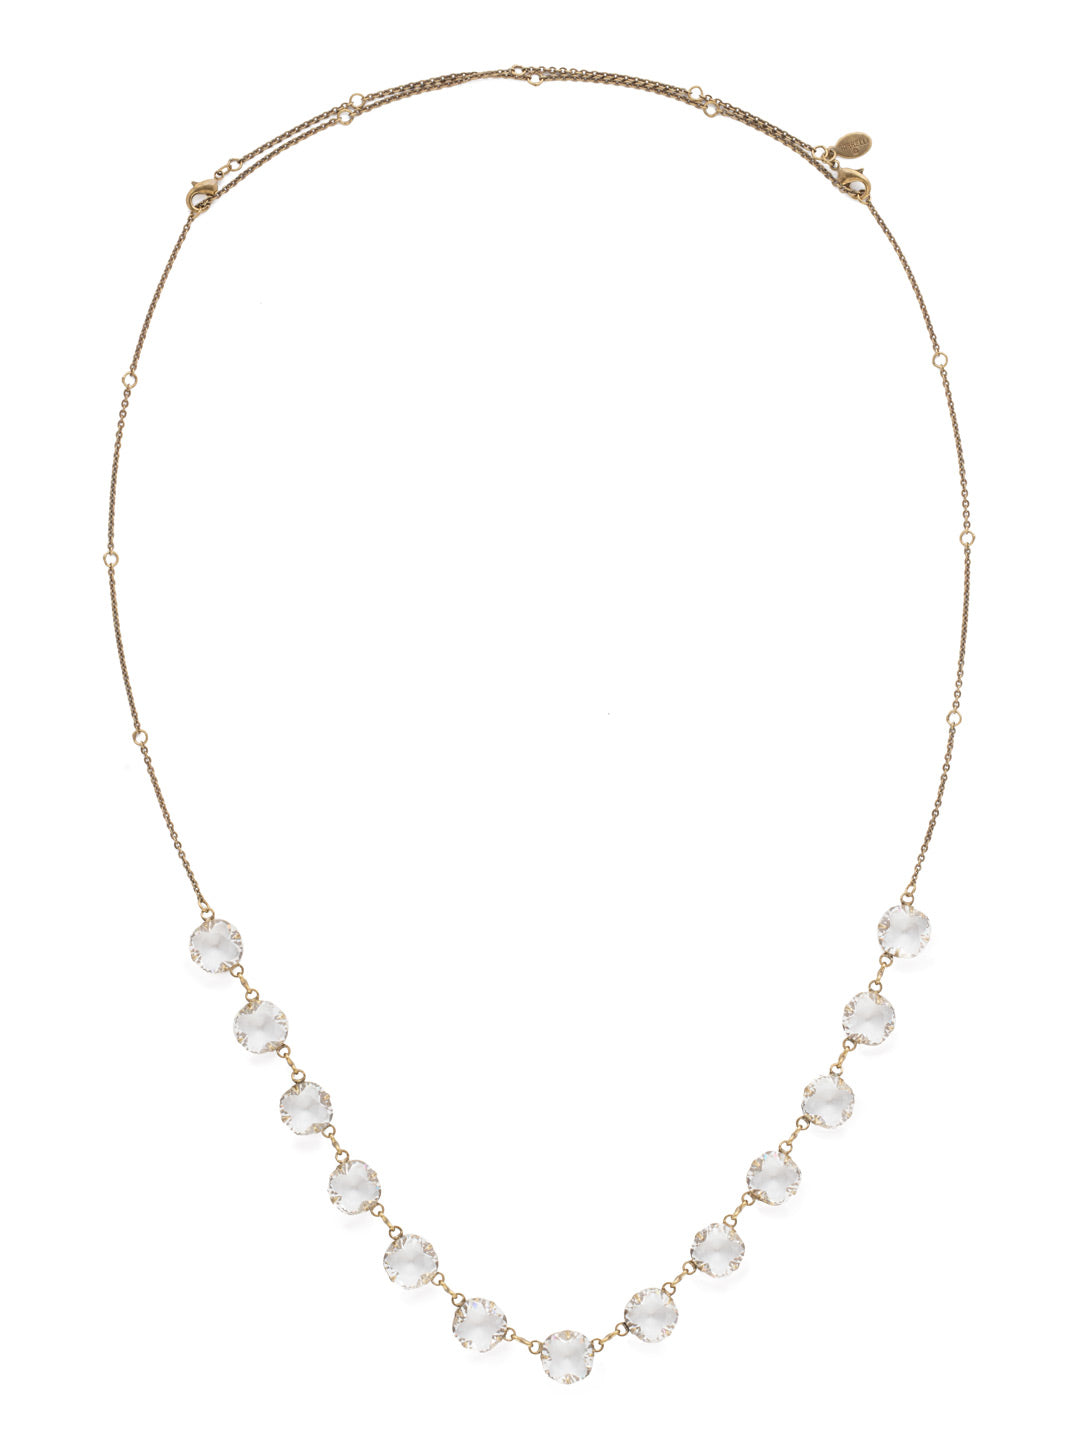 Crystal Rain Long Strand Necklace - NCR71AGCRY - <p>Dare to sparkle with this long strand necklace of evenly spaced cushion cut crystals. Rings placed throughout the chain allow this necklace to be worn as long or short as desired for maximum style! From Sorrelli's Crystal collection in our Antique Gold-tone finish.</p>